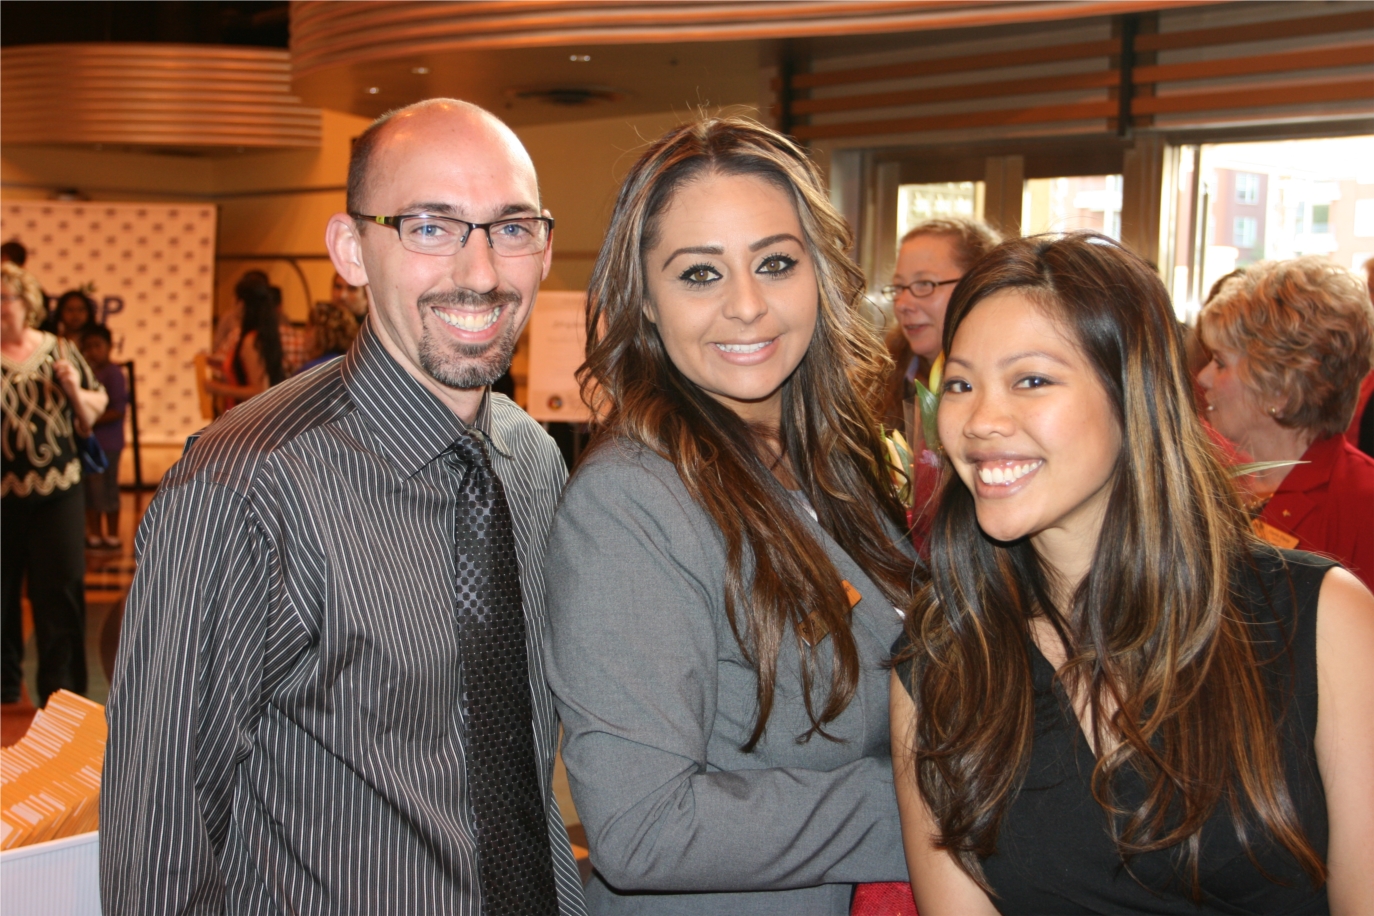 North Orange County Regional Occupational Program  staff support students at the 41st annual Celebration of Success Awards Ceremony. ROP honored 188 students by awarding $38,000.

Left to right: Instructor Sean Dooley, Automotive Technology; Instructor Esmeralda Hernandez, Floral Design; Career Guidance Specialist Han Kim. 